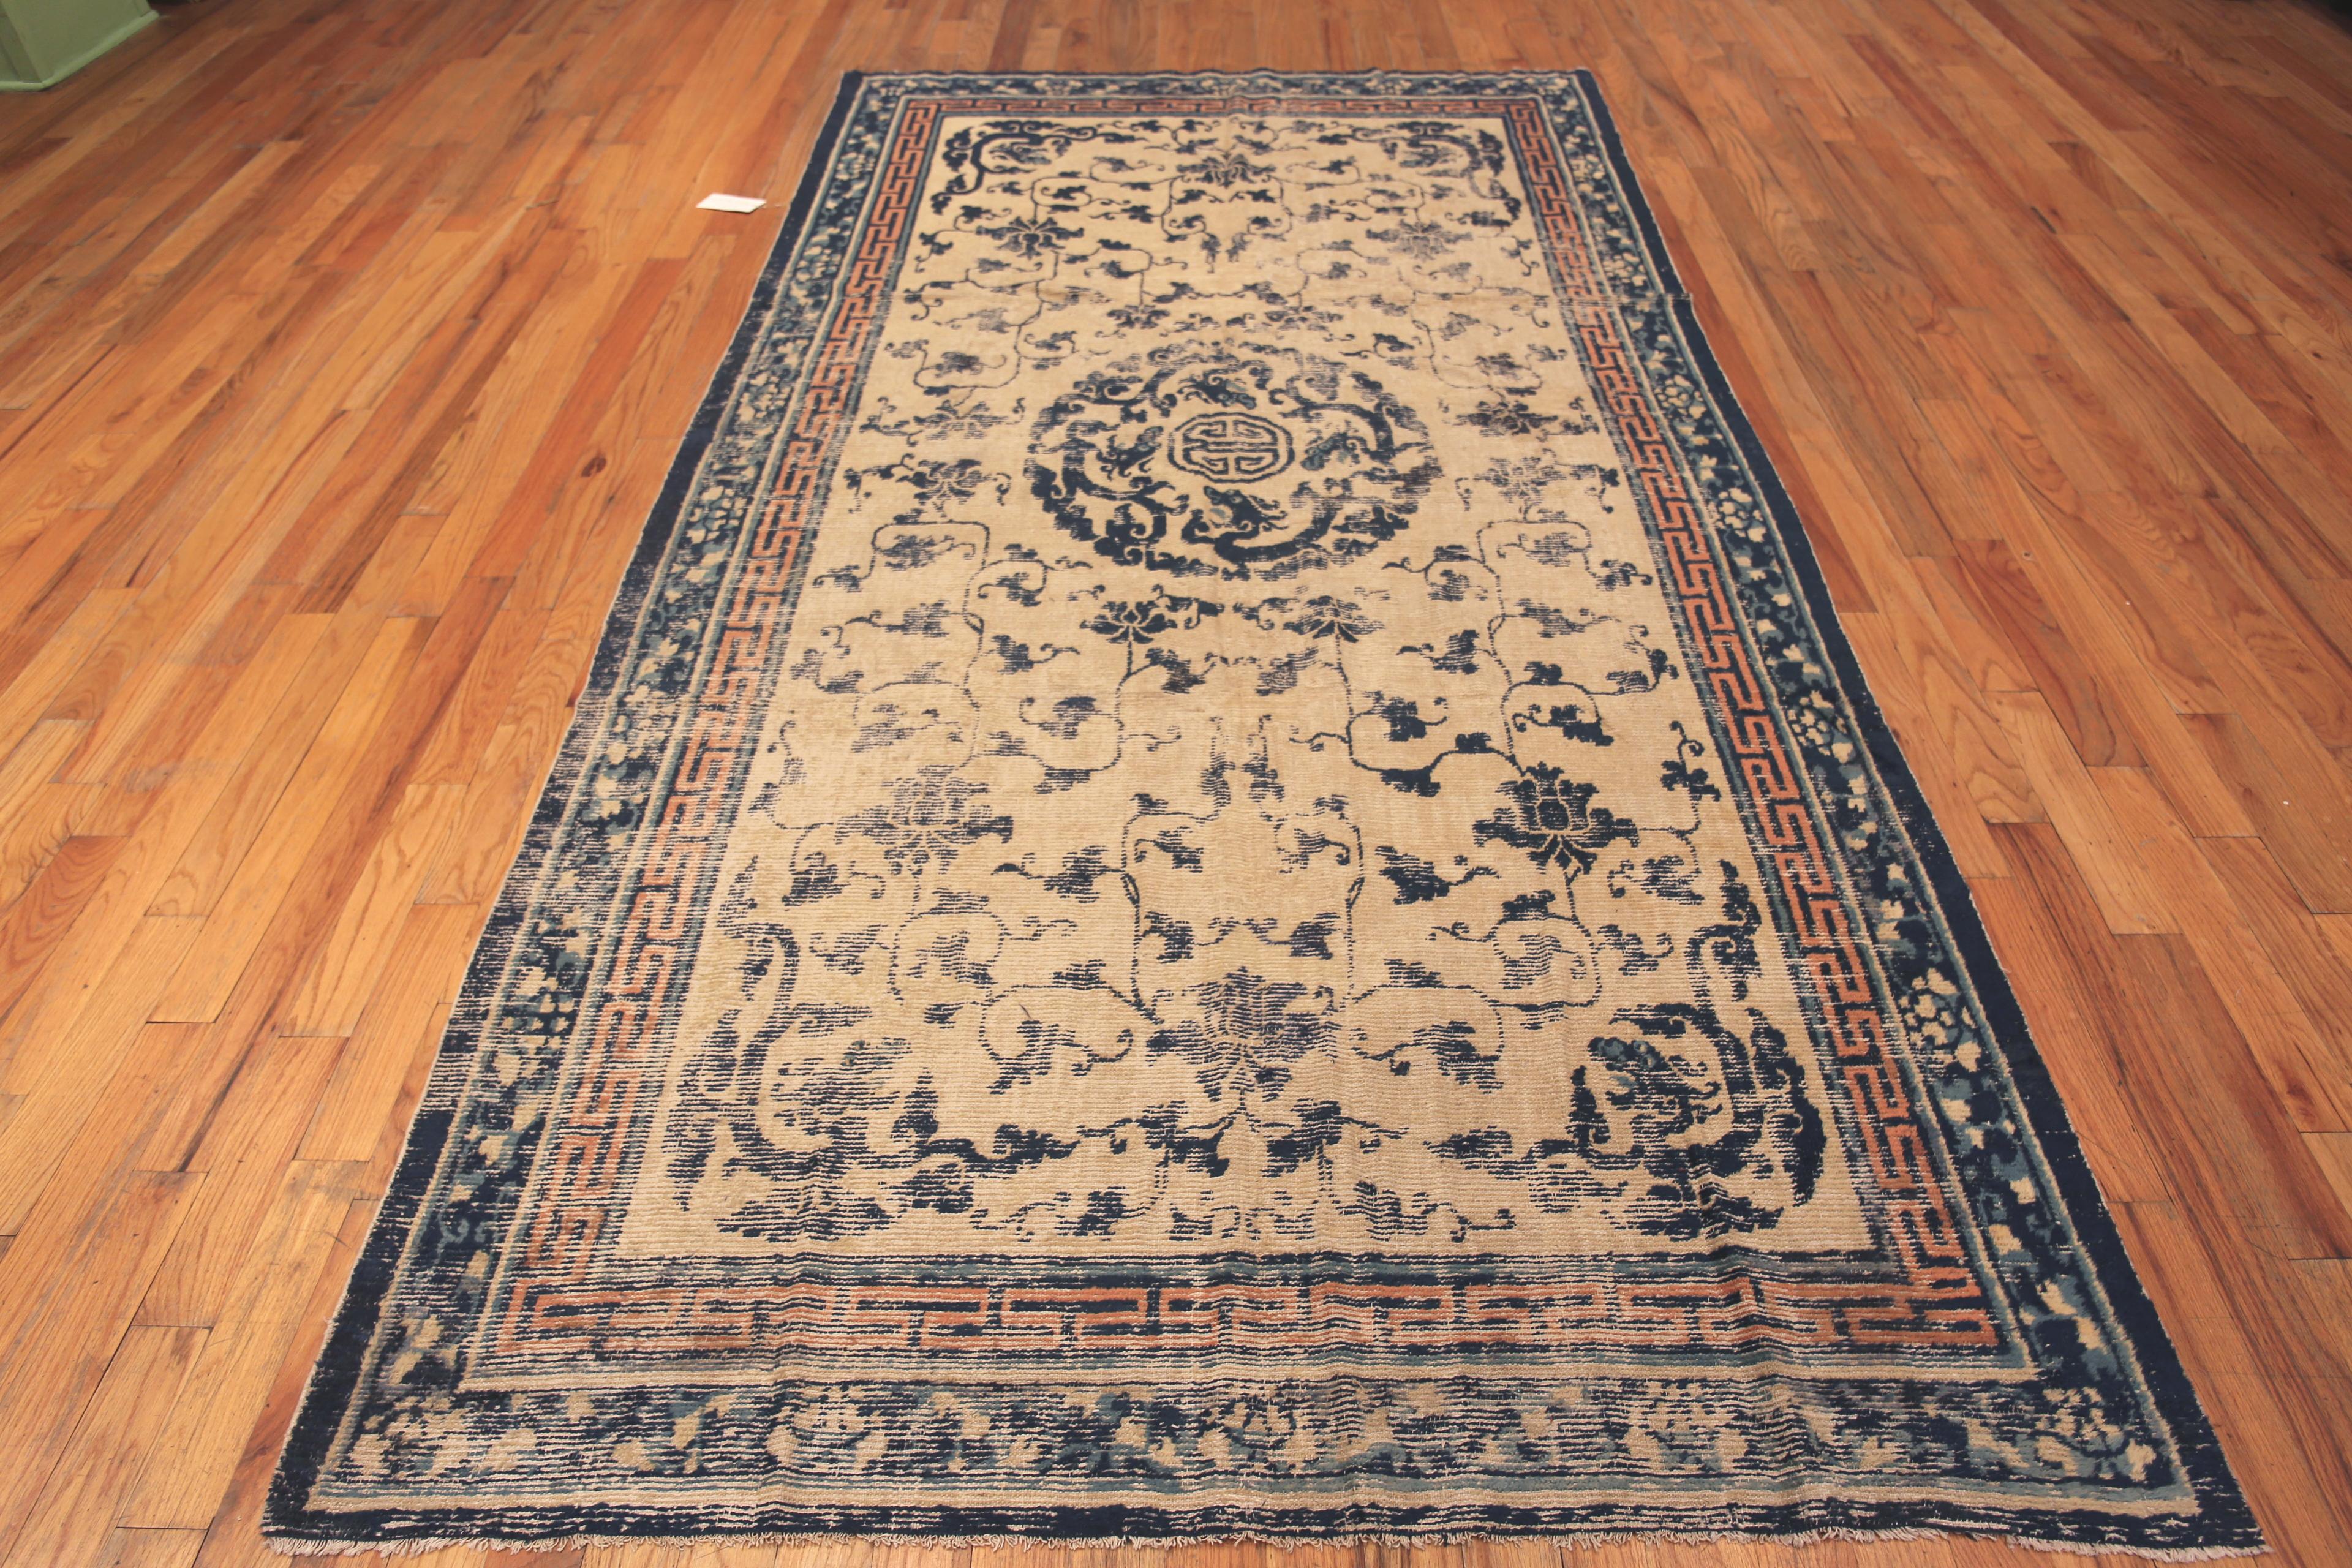 Beautiful Early 19th Century Antique Chinese Ningxia Shabby Chic Rug, Country Of Origin: China, Size: 5 ft 10 in x 11 ft 3 in (1.78 m x 3.43 m), Circa Date: 19th century